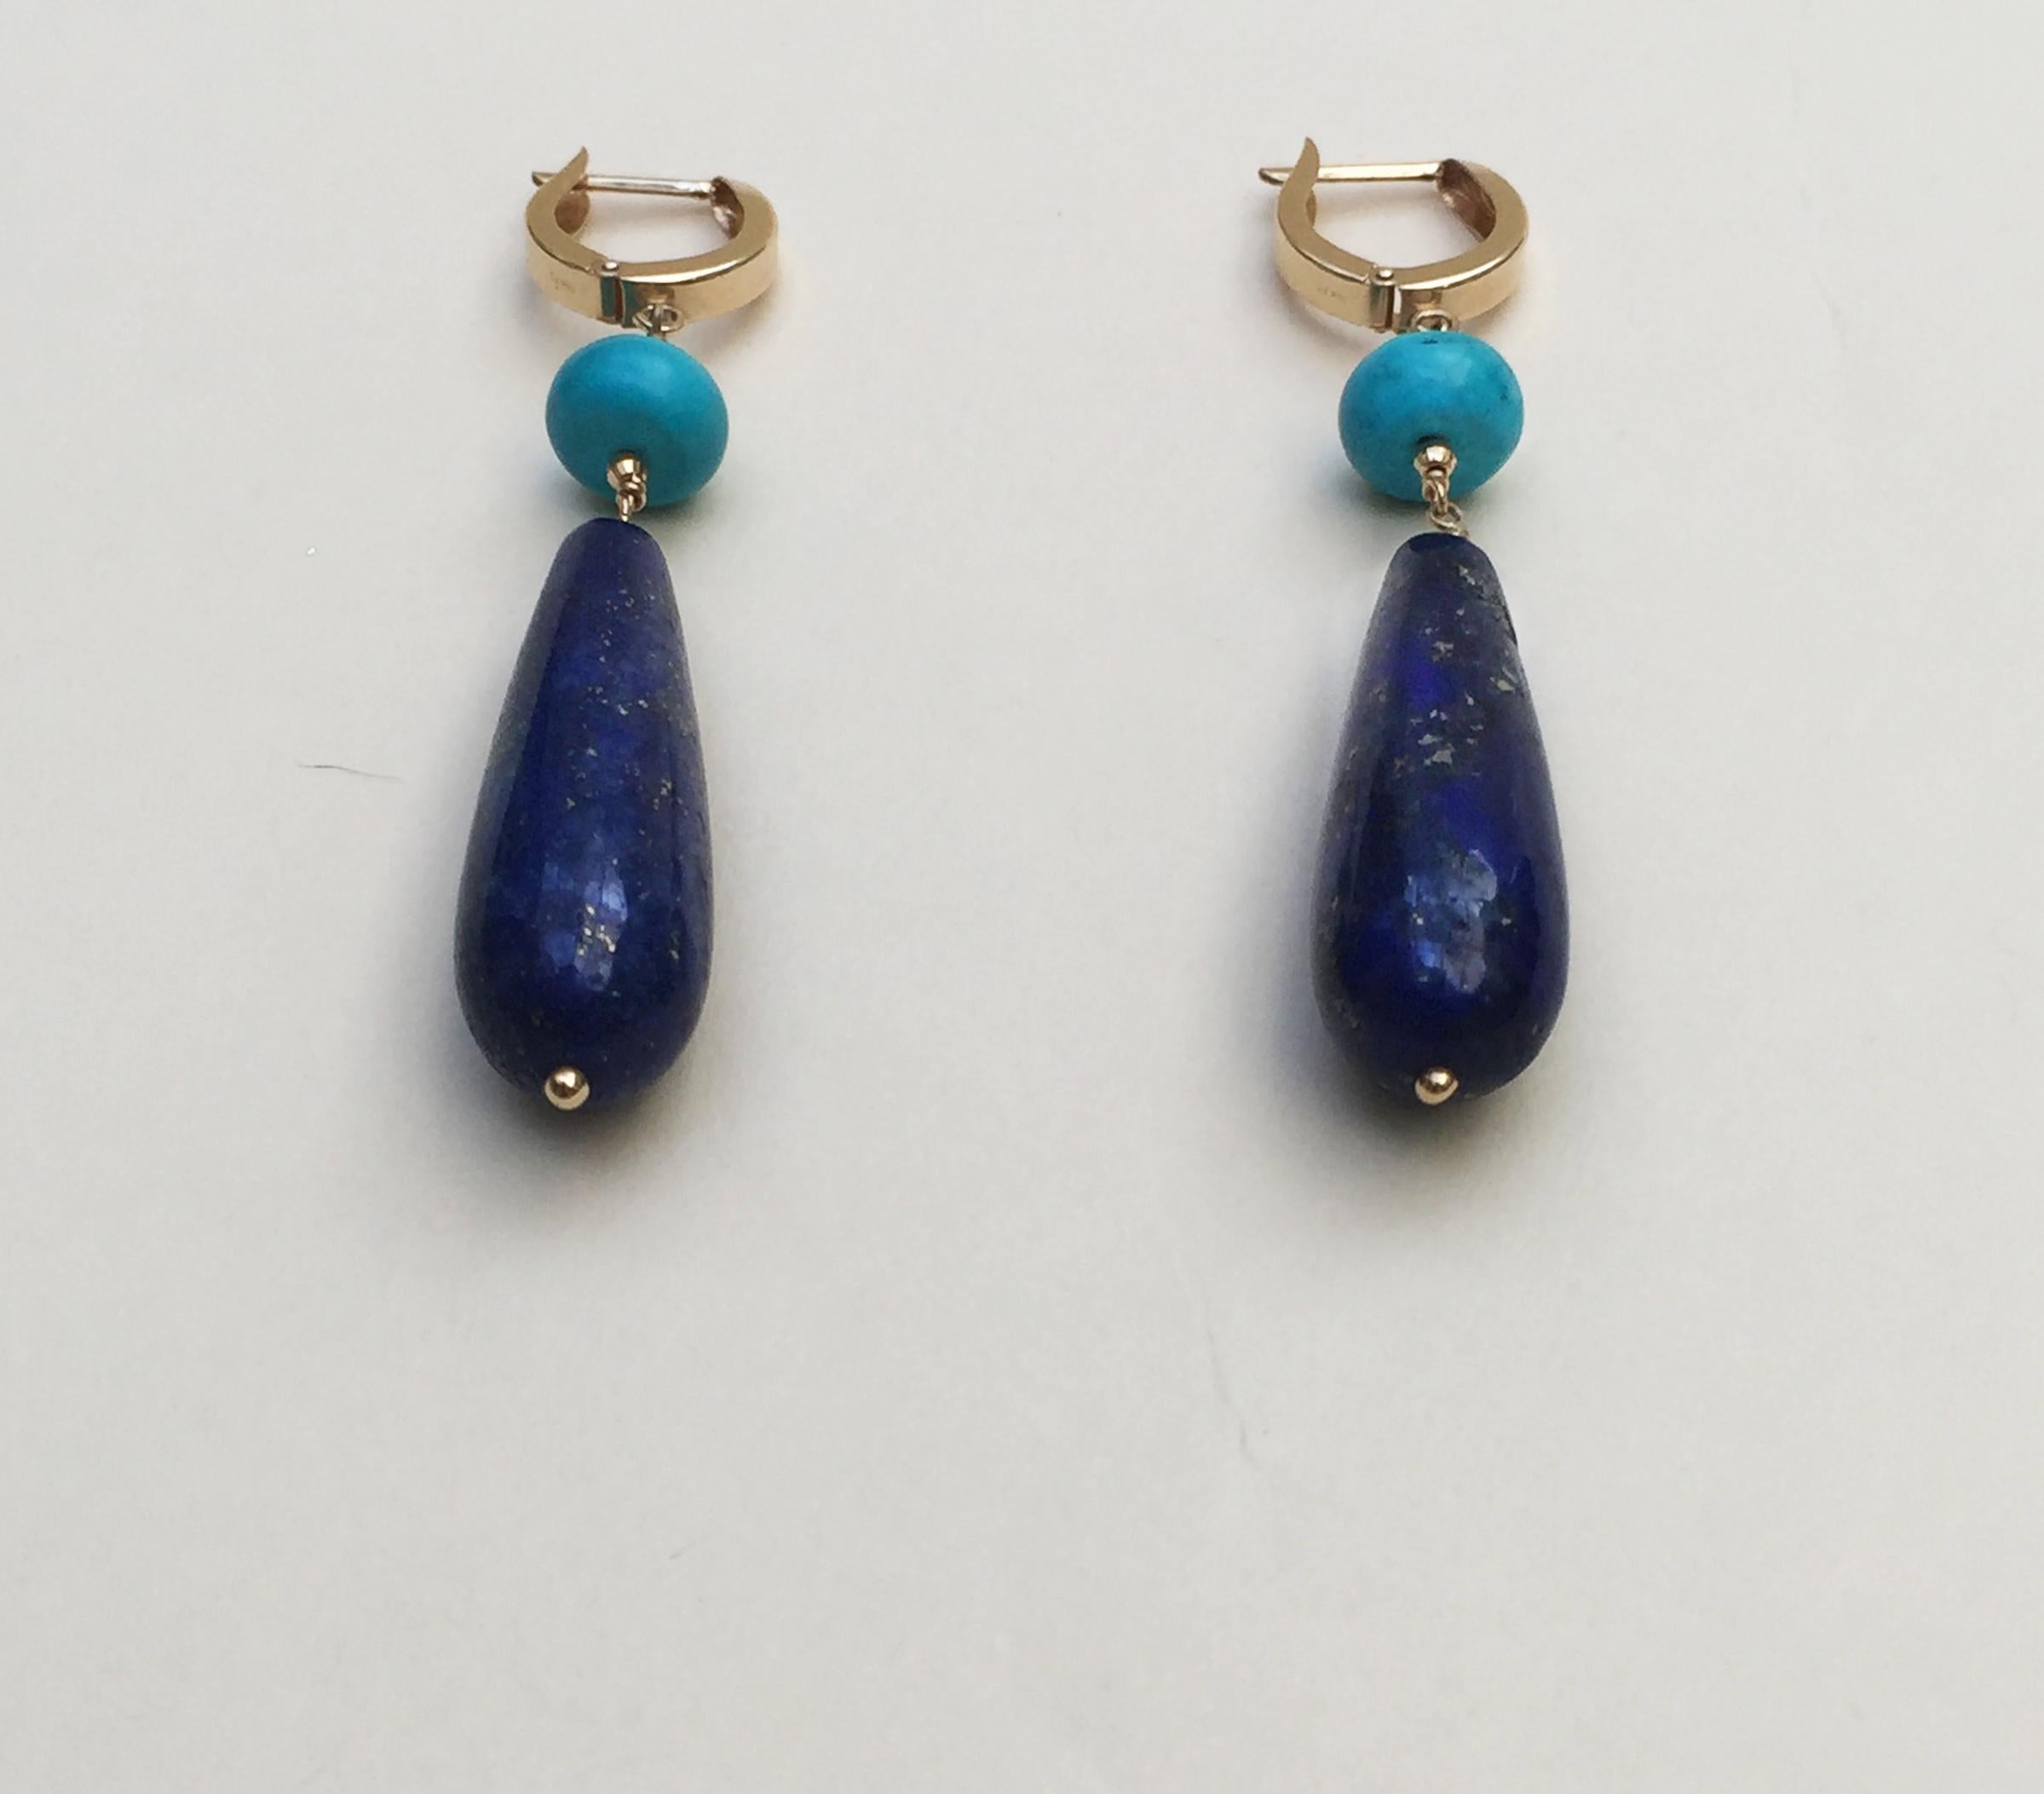 This lapis lazuli and turquoise earrings are highlighted with 14k yellow gold faceted beads and lever backs. Shimmering within the lapis lazuli are veins of gold, adding a natural shine to the earrings. Accenting the deep blue of the lapis lazuli